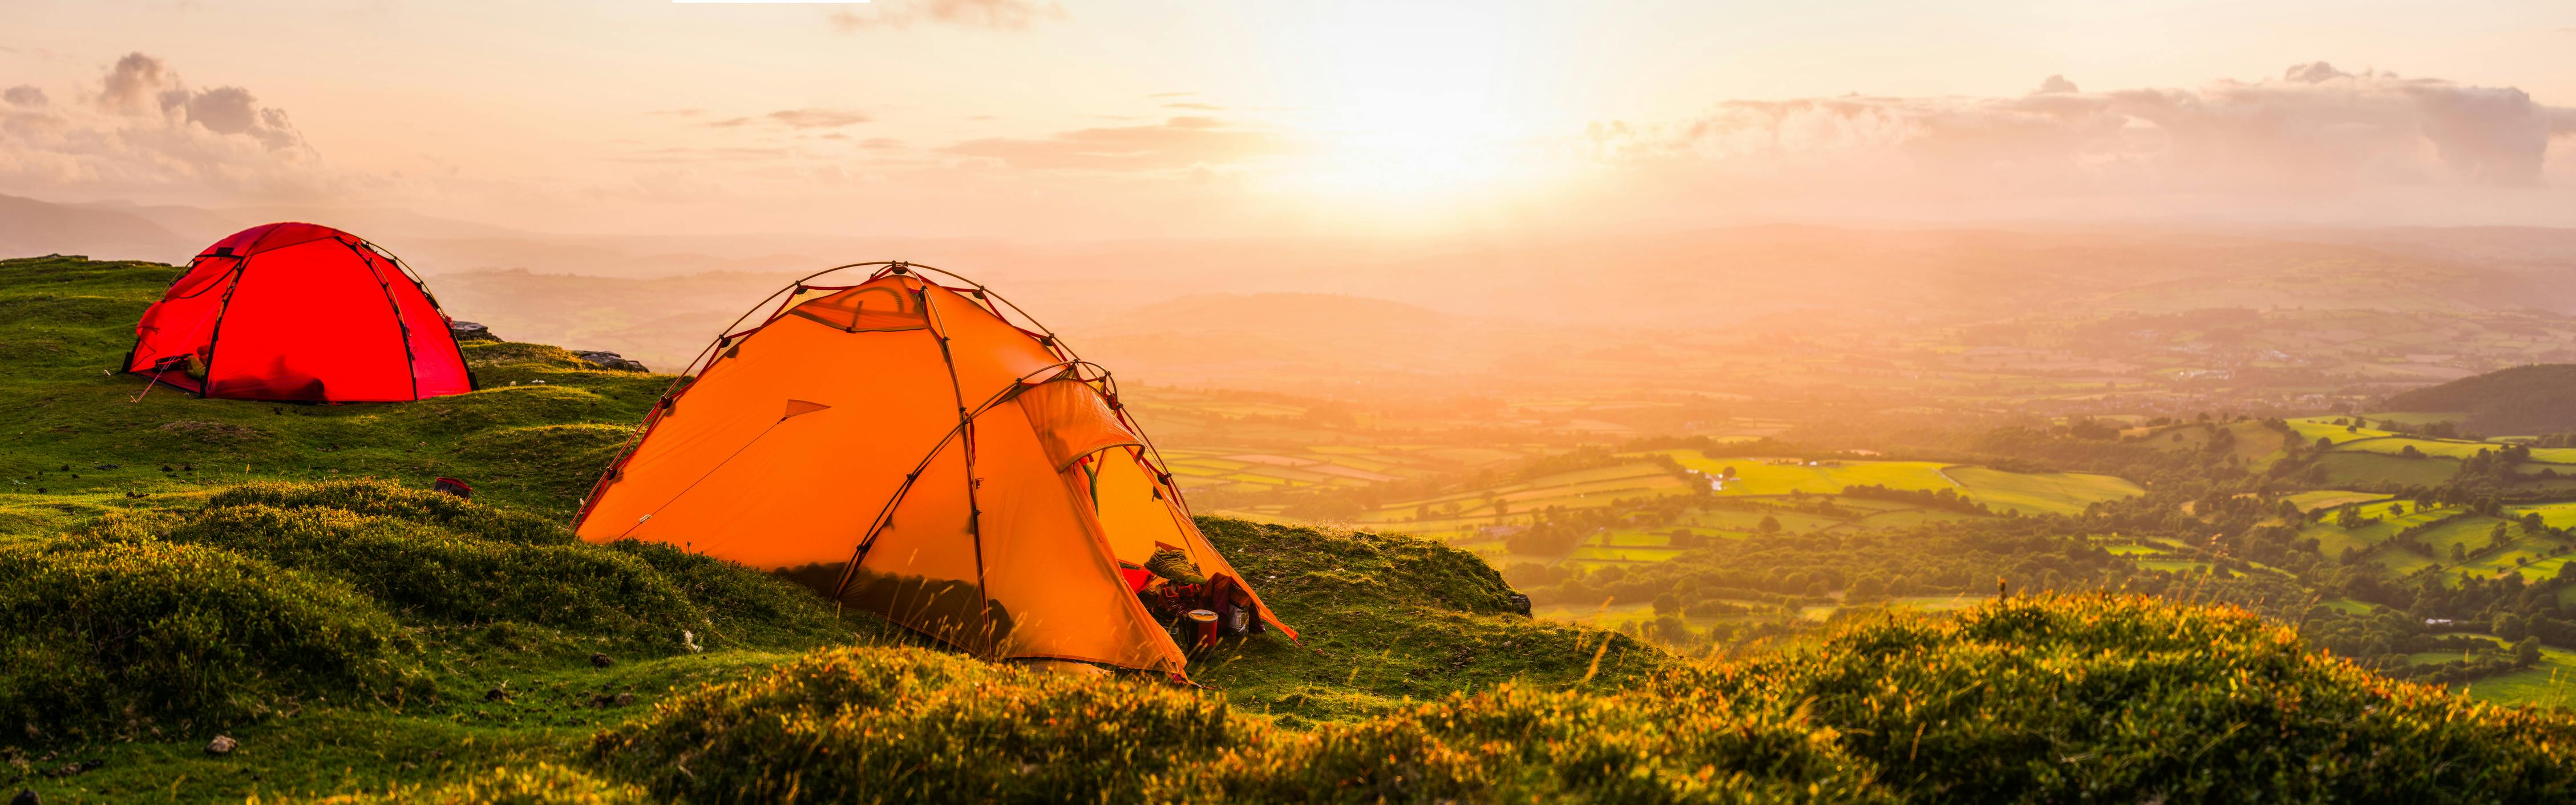 Two tents - one orange and one red - sit on a grassy hill as the sun rises